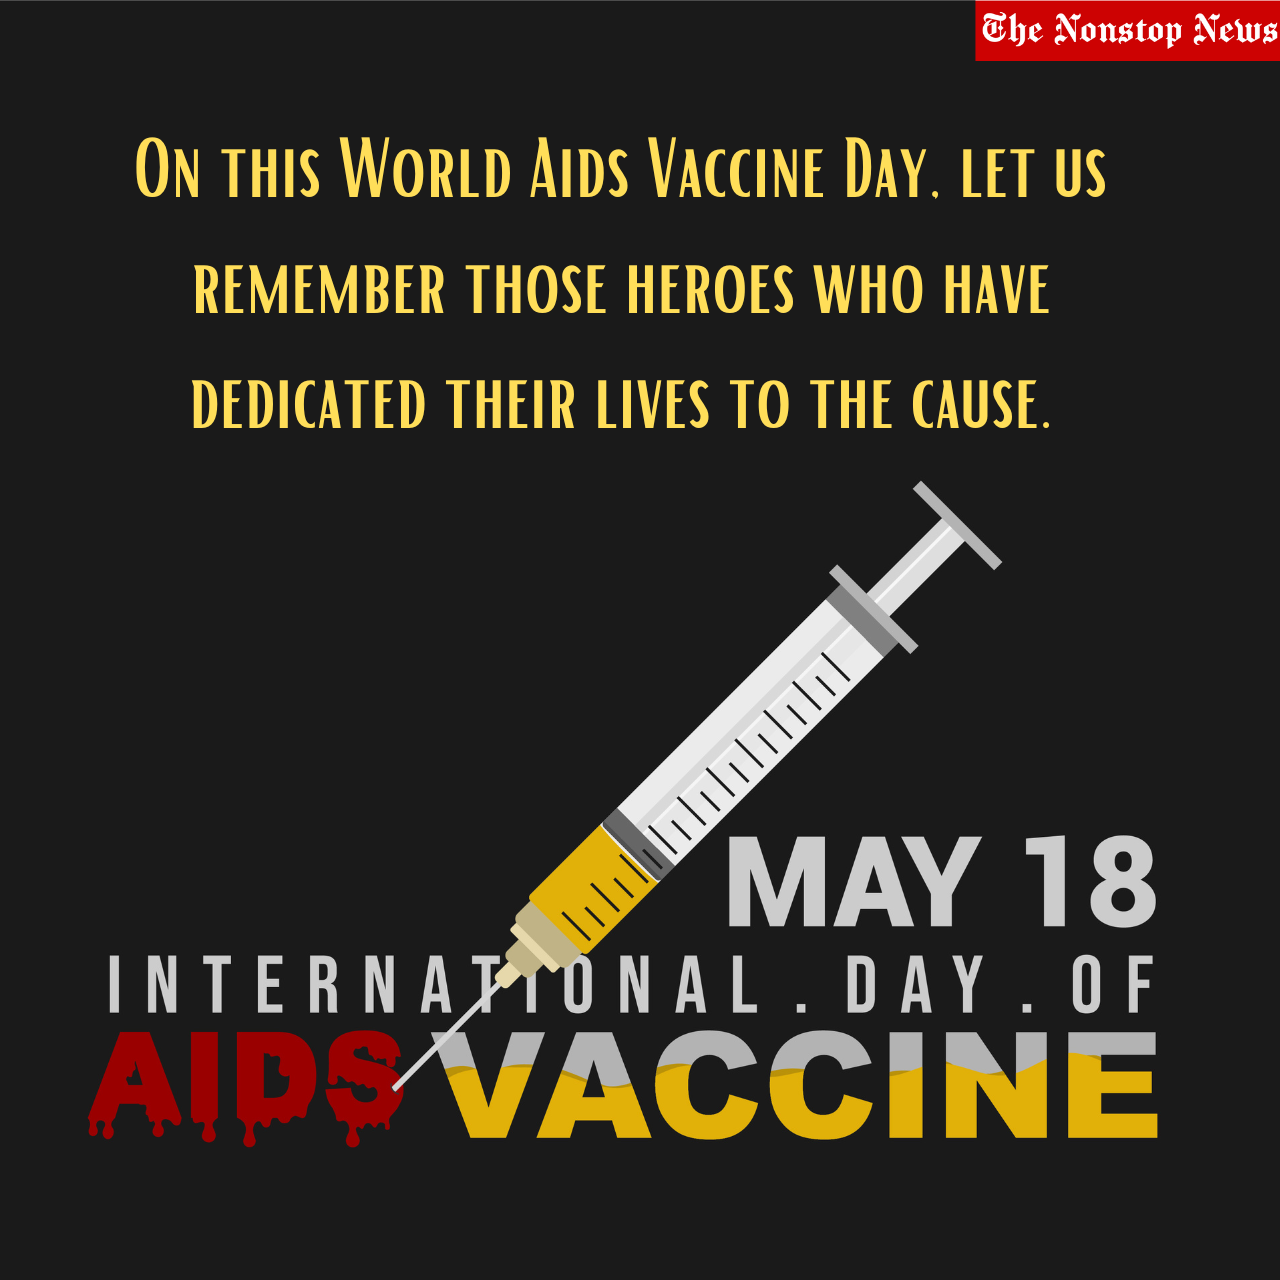 World AIDS Vaccine Day 2023 Current Theme, Drawings, Quotes, Wishes, Images, Greetings, Sayings, Slogans, Posters, Banners, and Messages